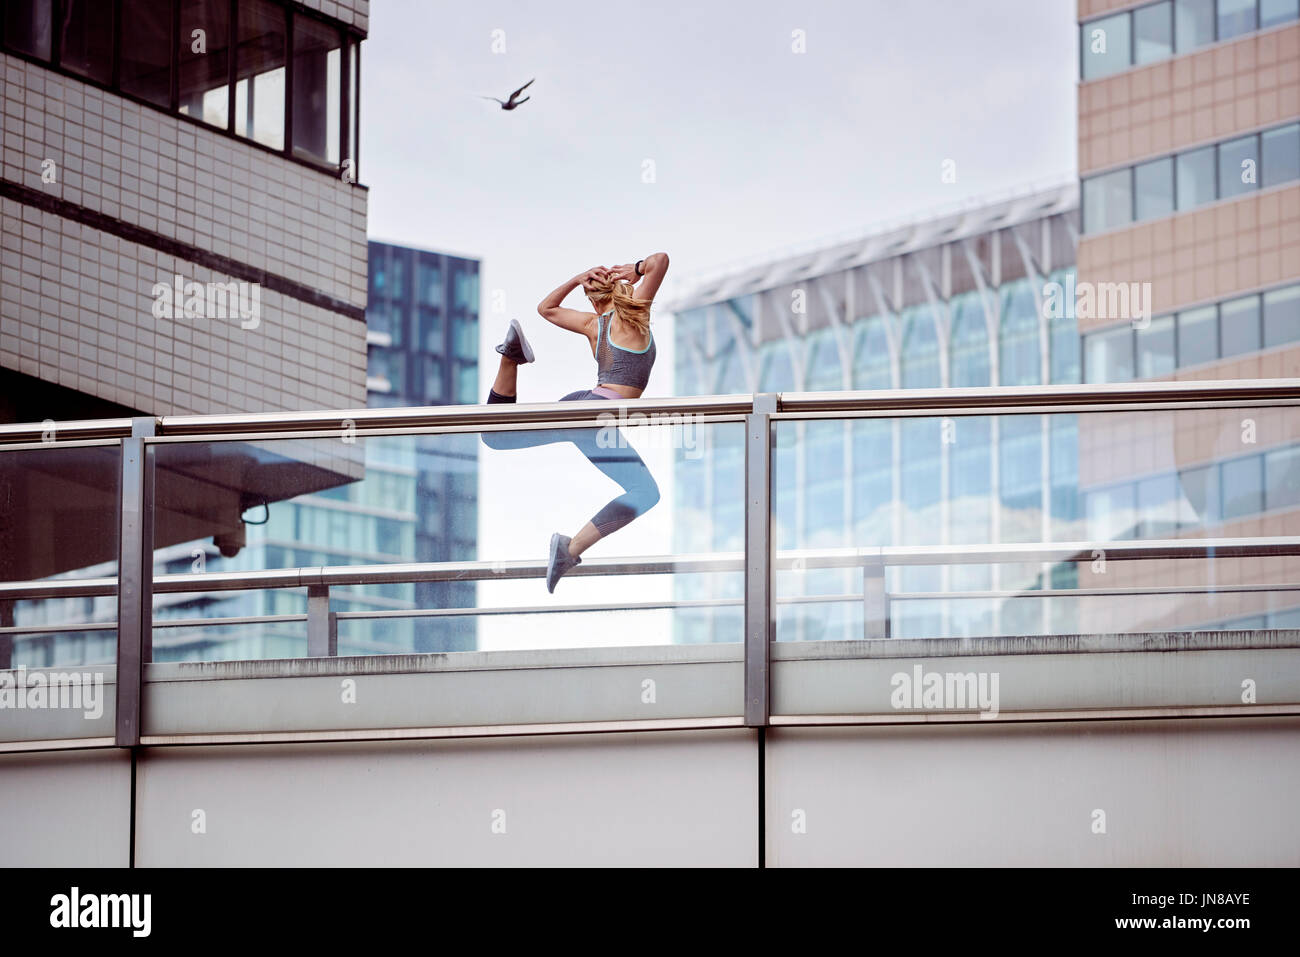 A young woman expresses her joy and freedom by leaping into the air in an urban cityscape Stock Photo